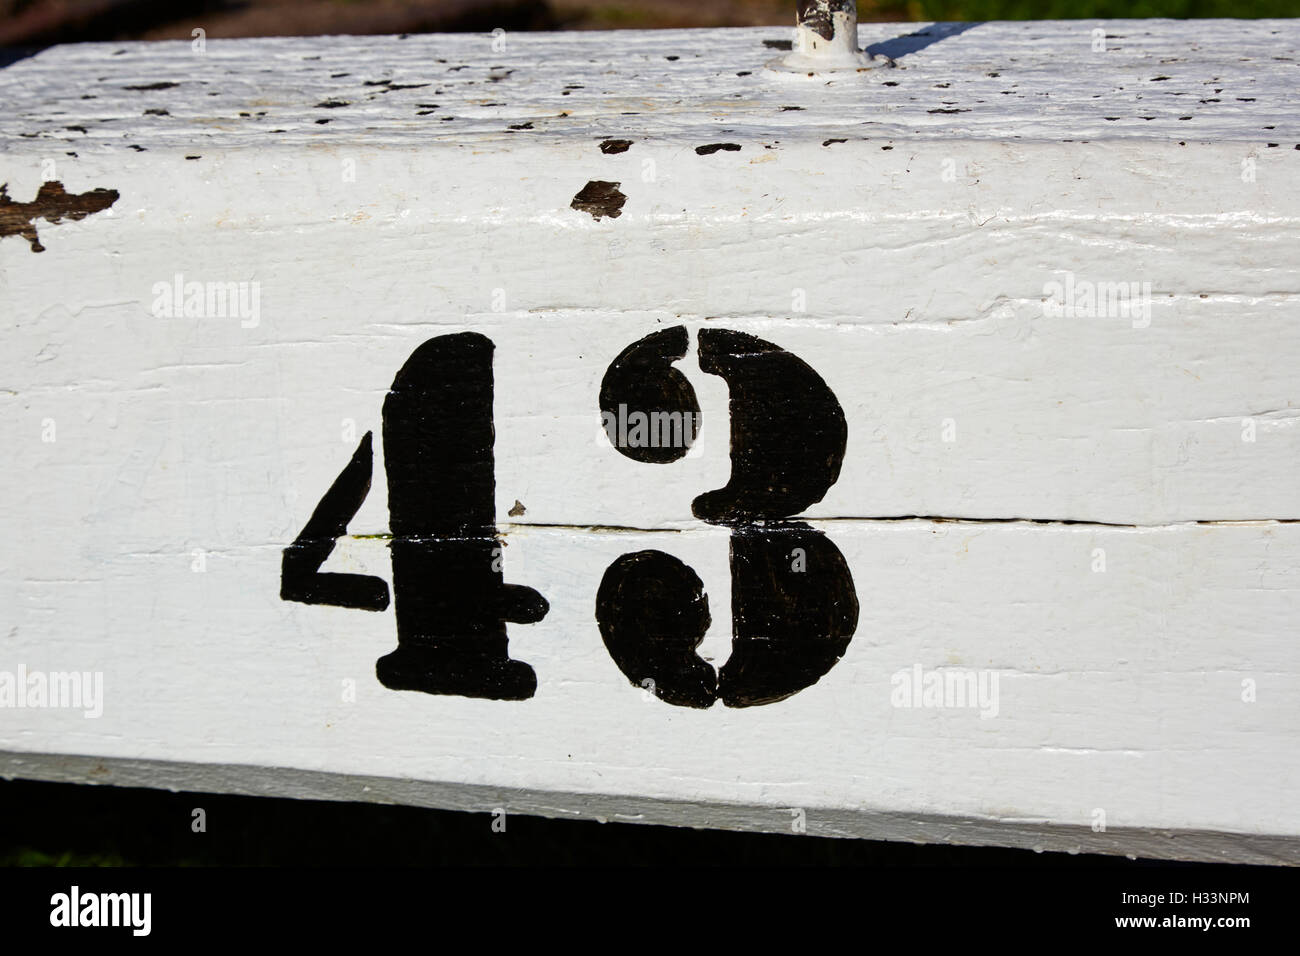 Number 43 on Red Bull lock gate near Kidsgrove Stock Photo